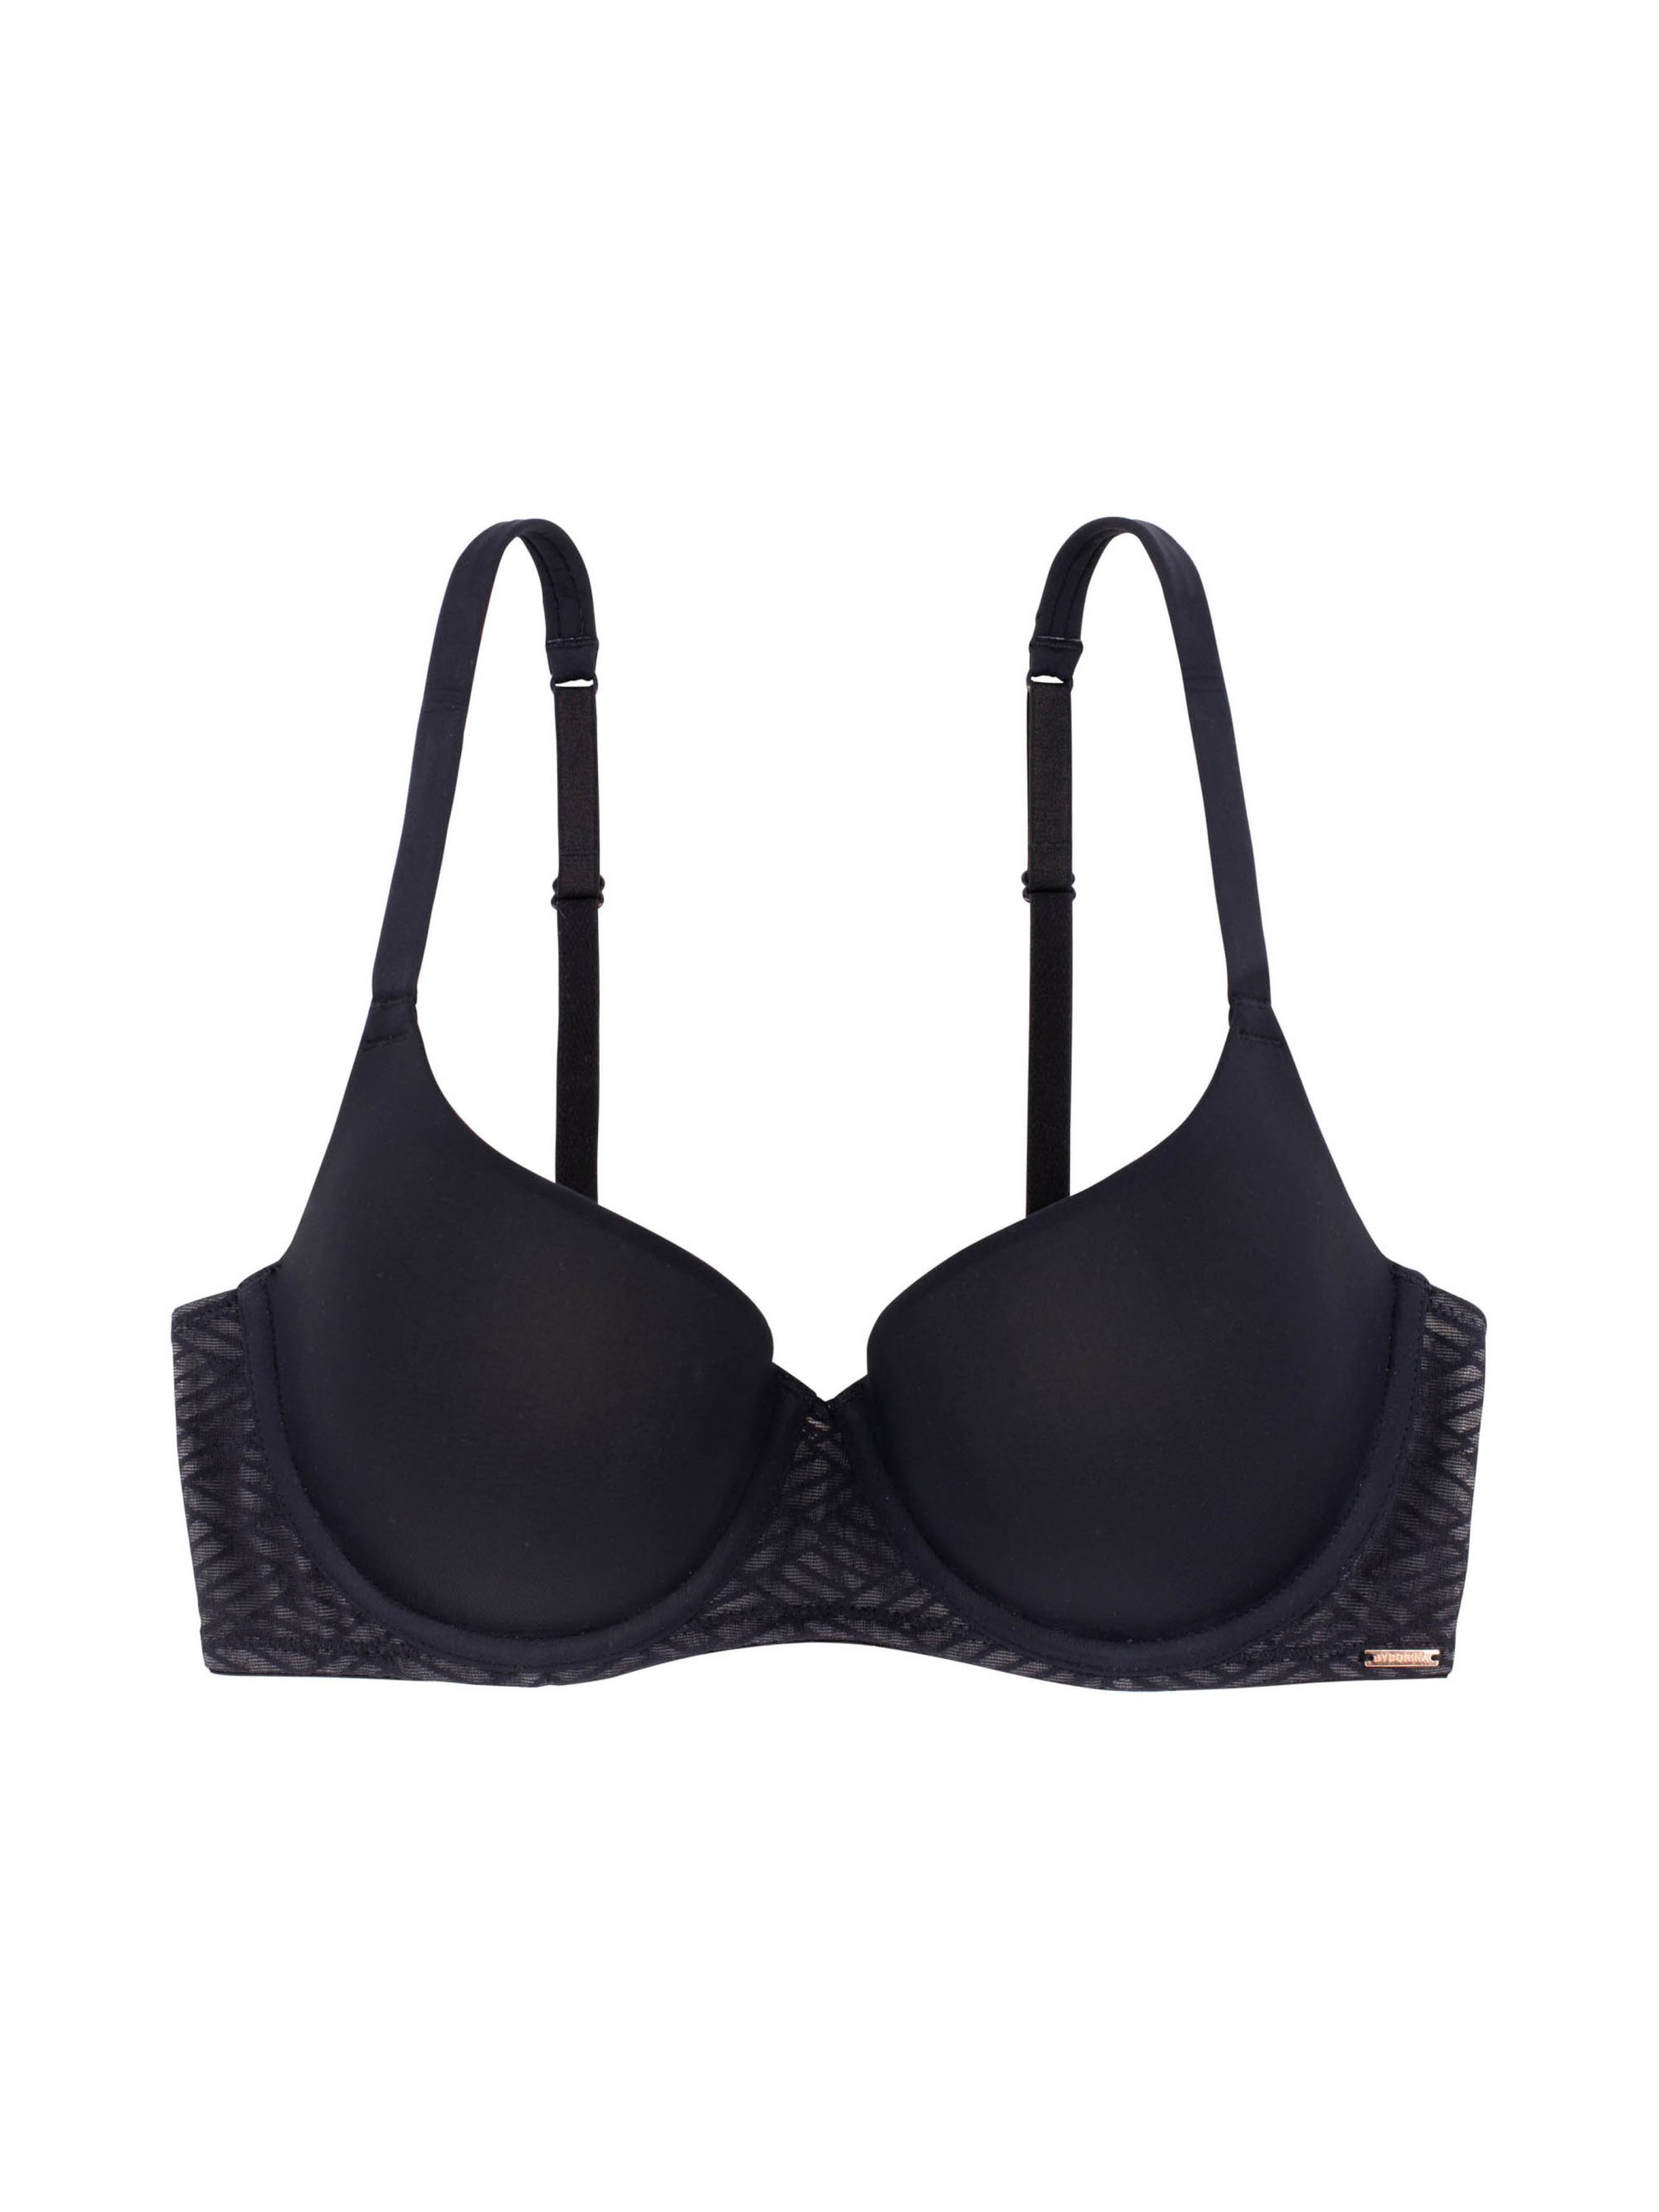 Dorina Lianne Lace T-Shirt Bra Black Size 32D New with tags! - $31 New With  Tags - From Krystle